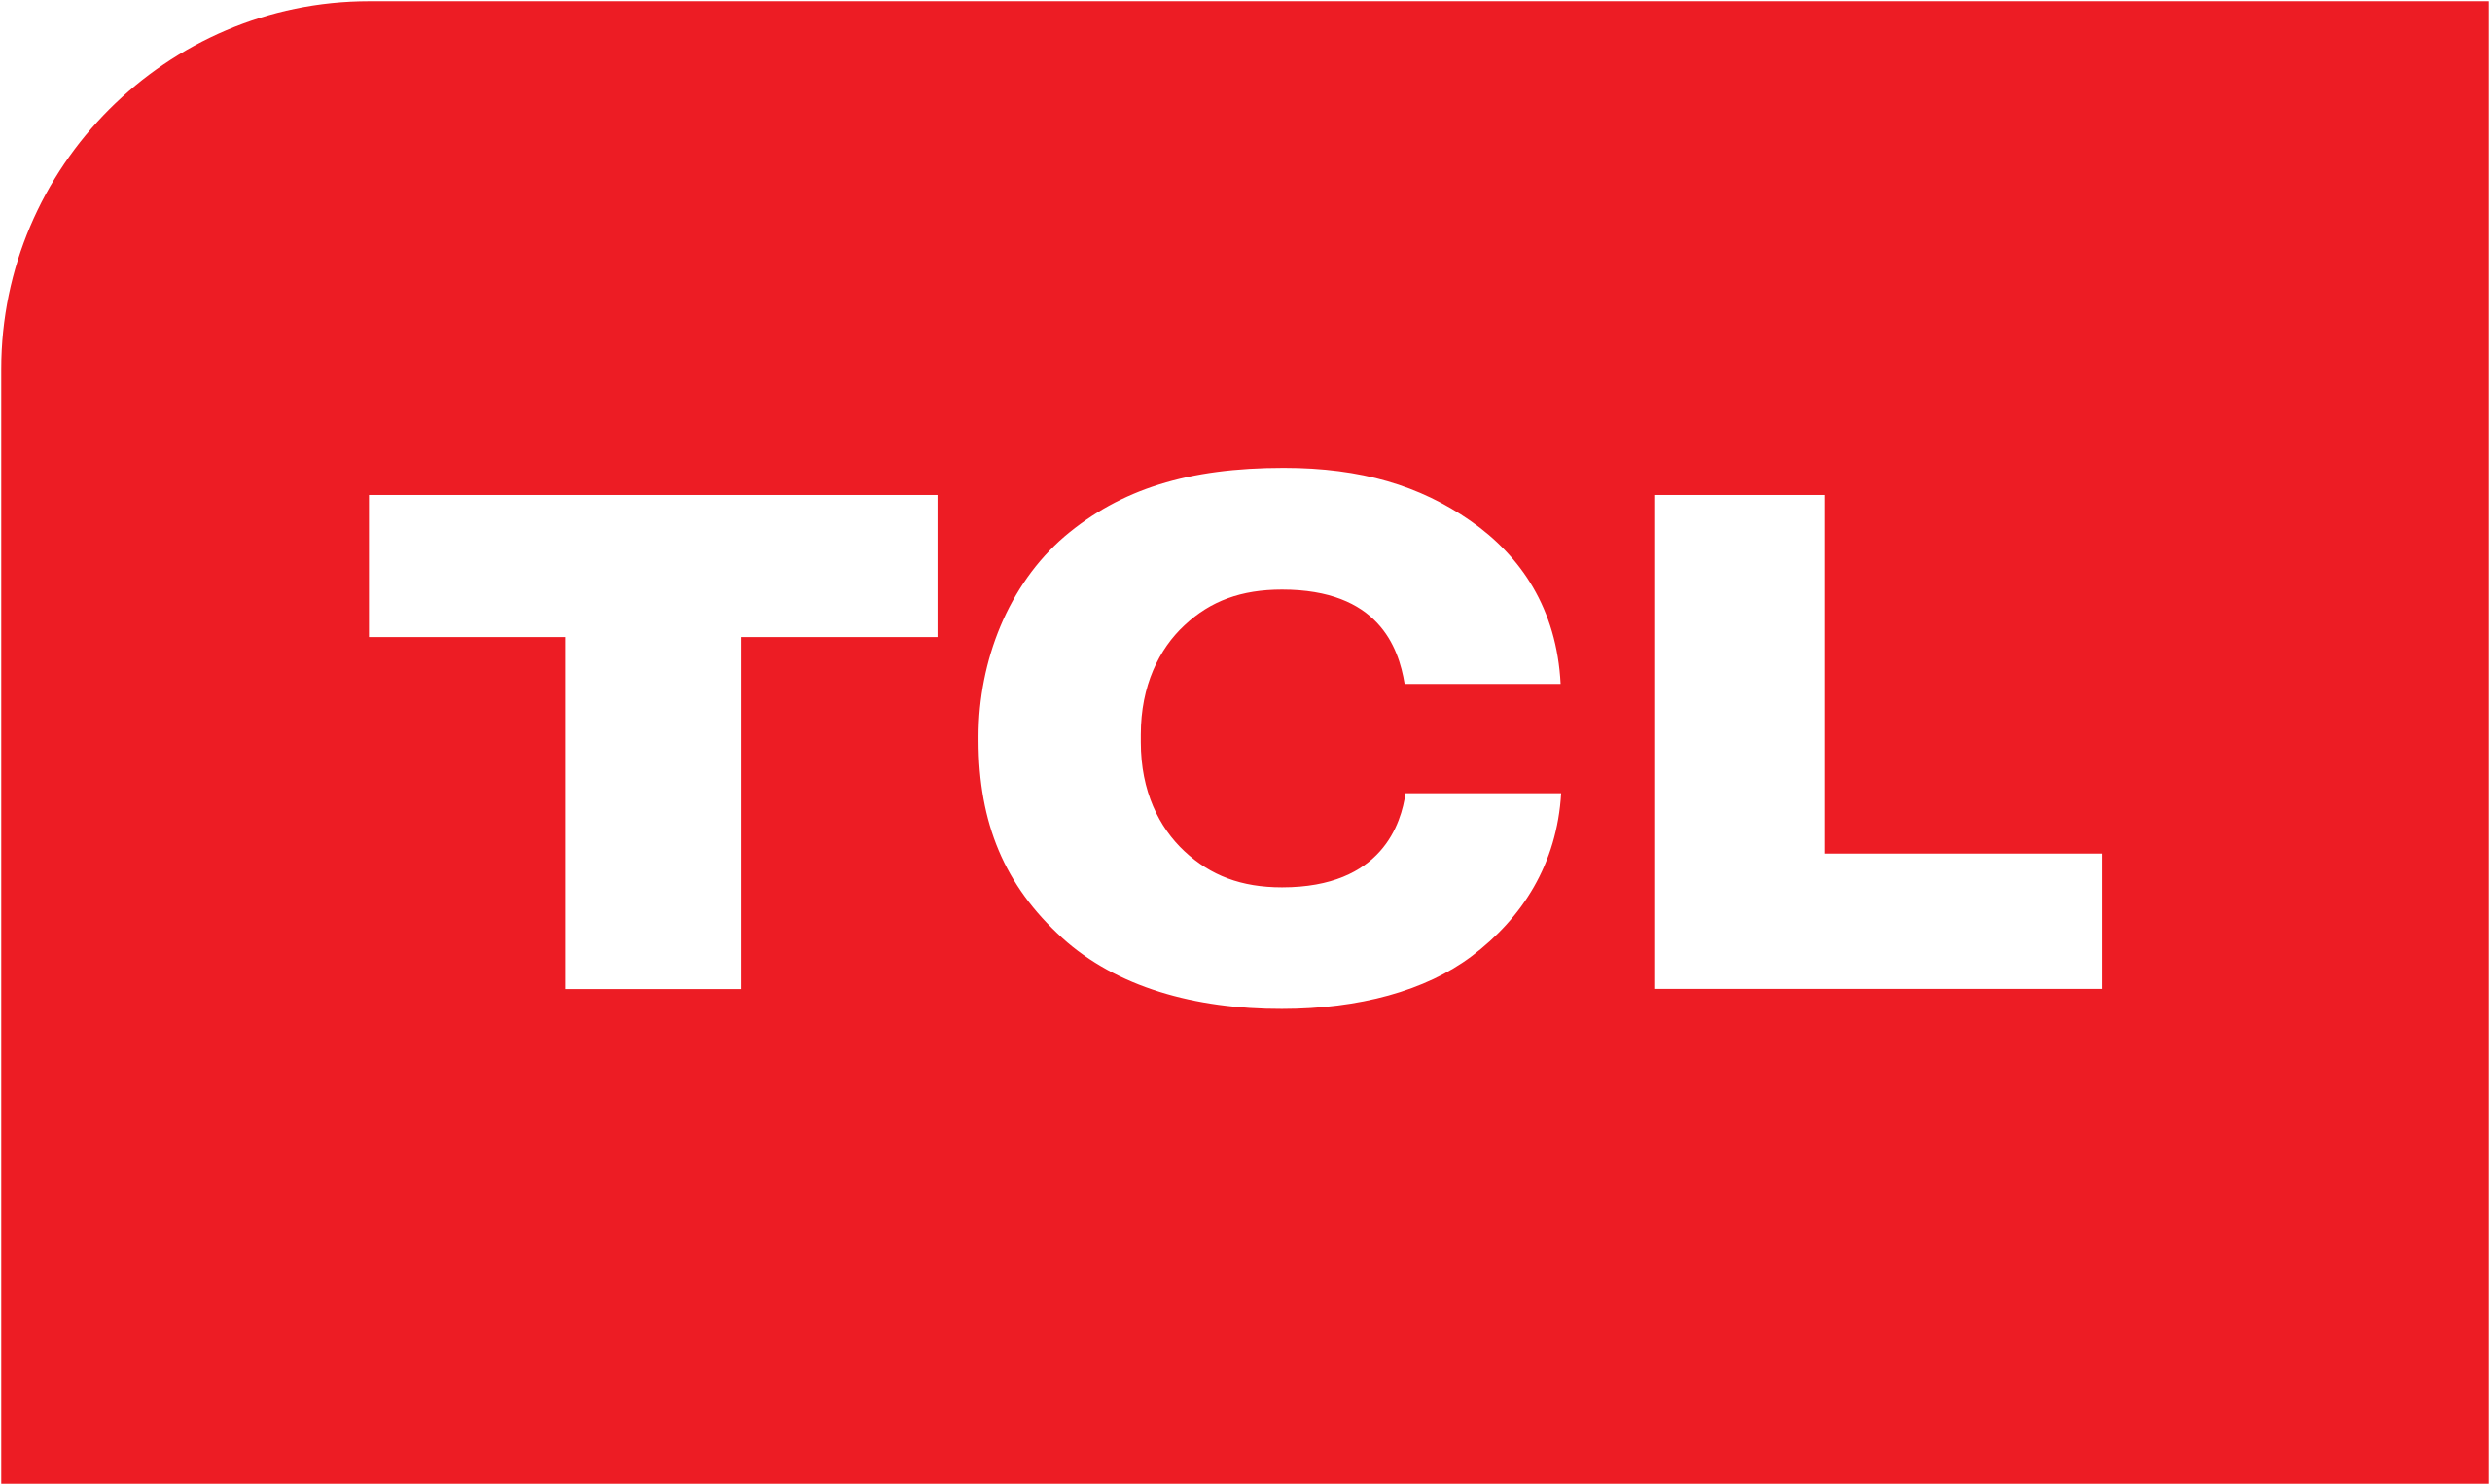 Logo_of_the_TCL_Corporation.svg_